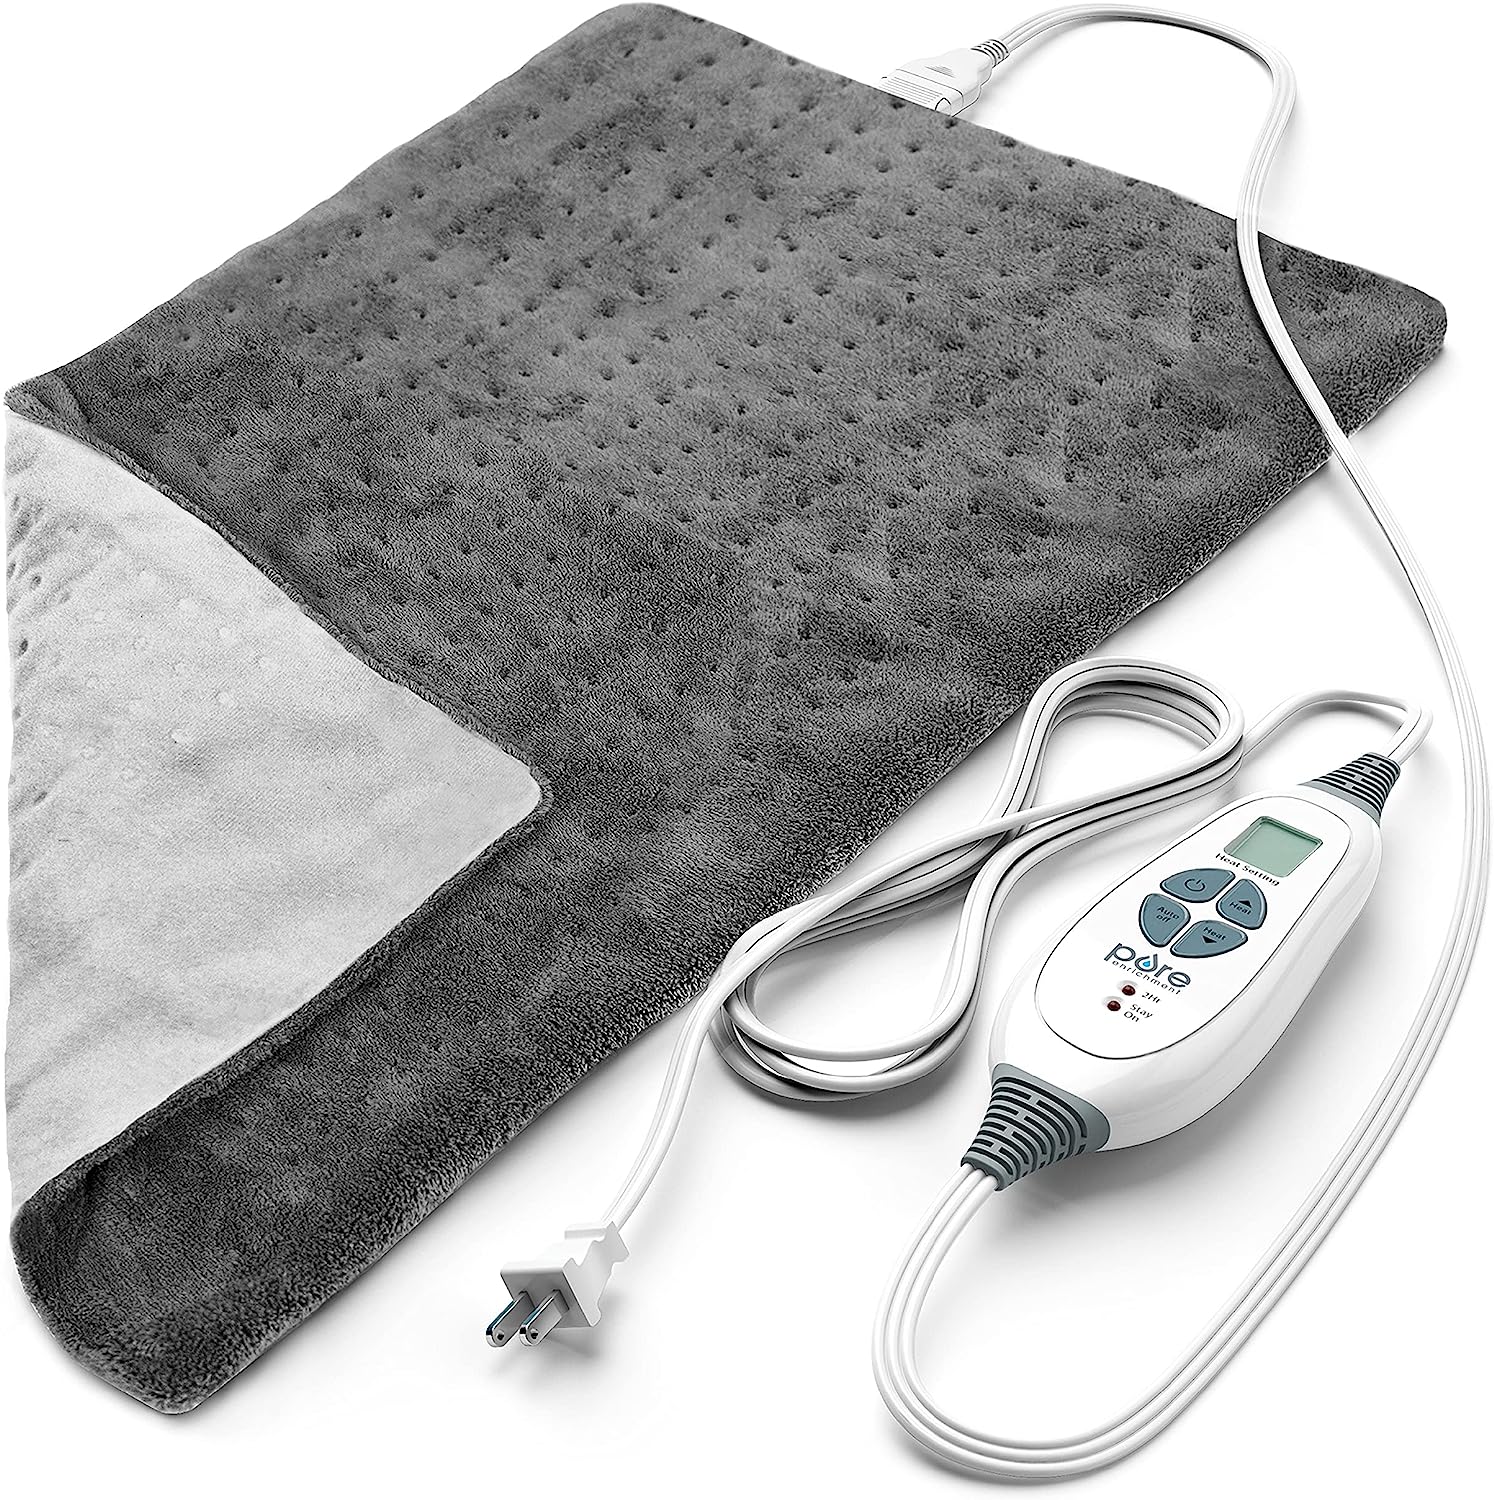 PureRelief XL King Size Heating Pad heating pad after acupuncture